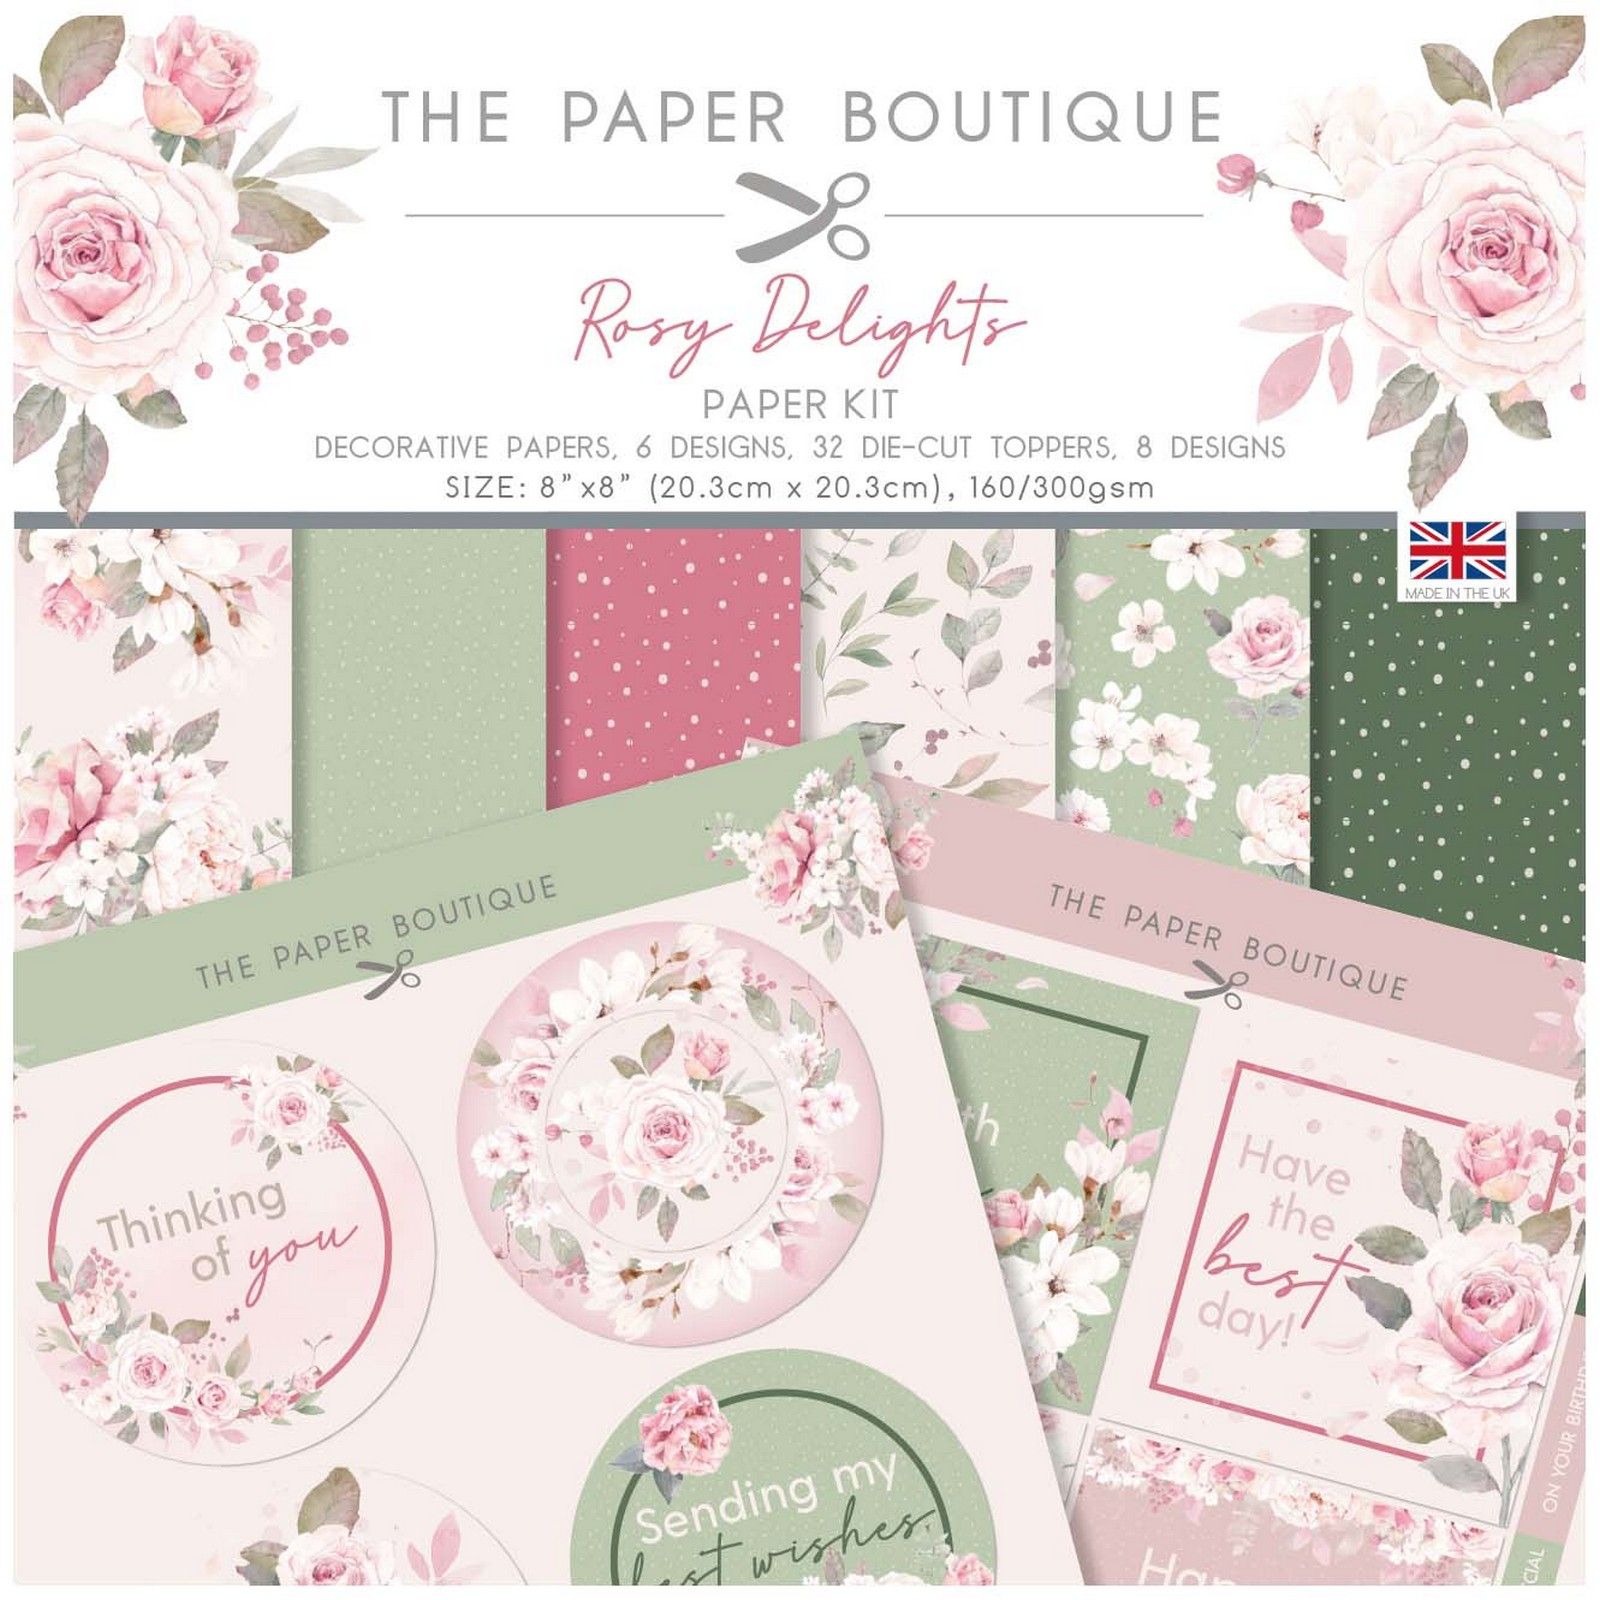 The Paper Boutique • Rosy delights paper kit